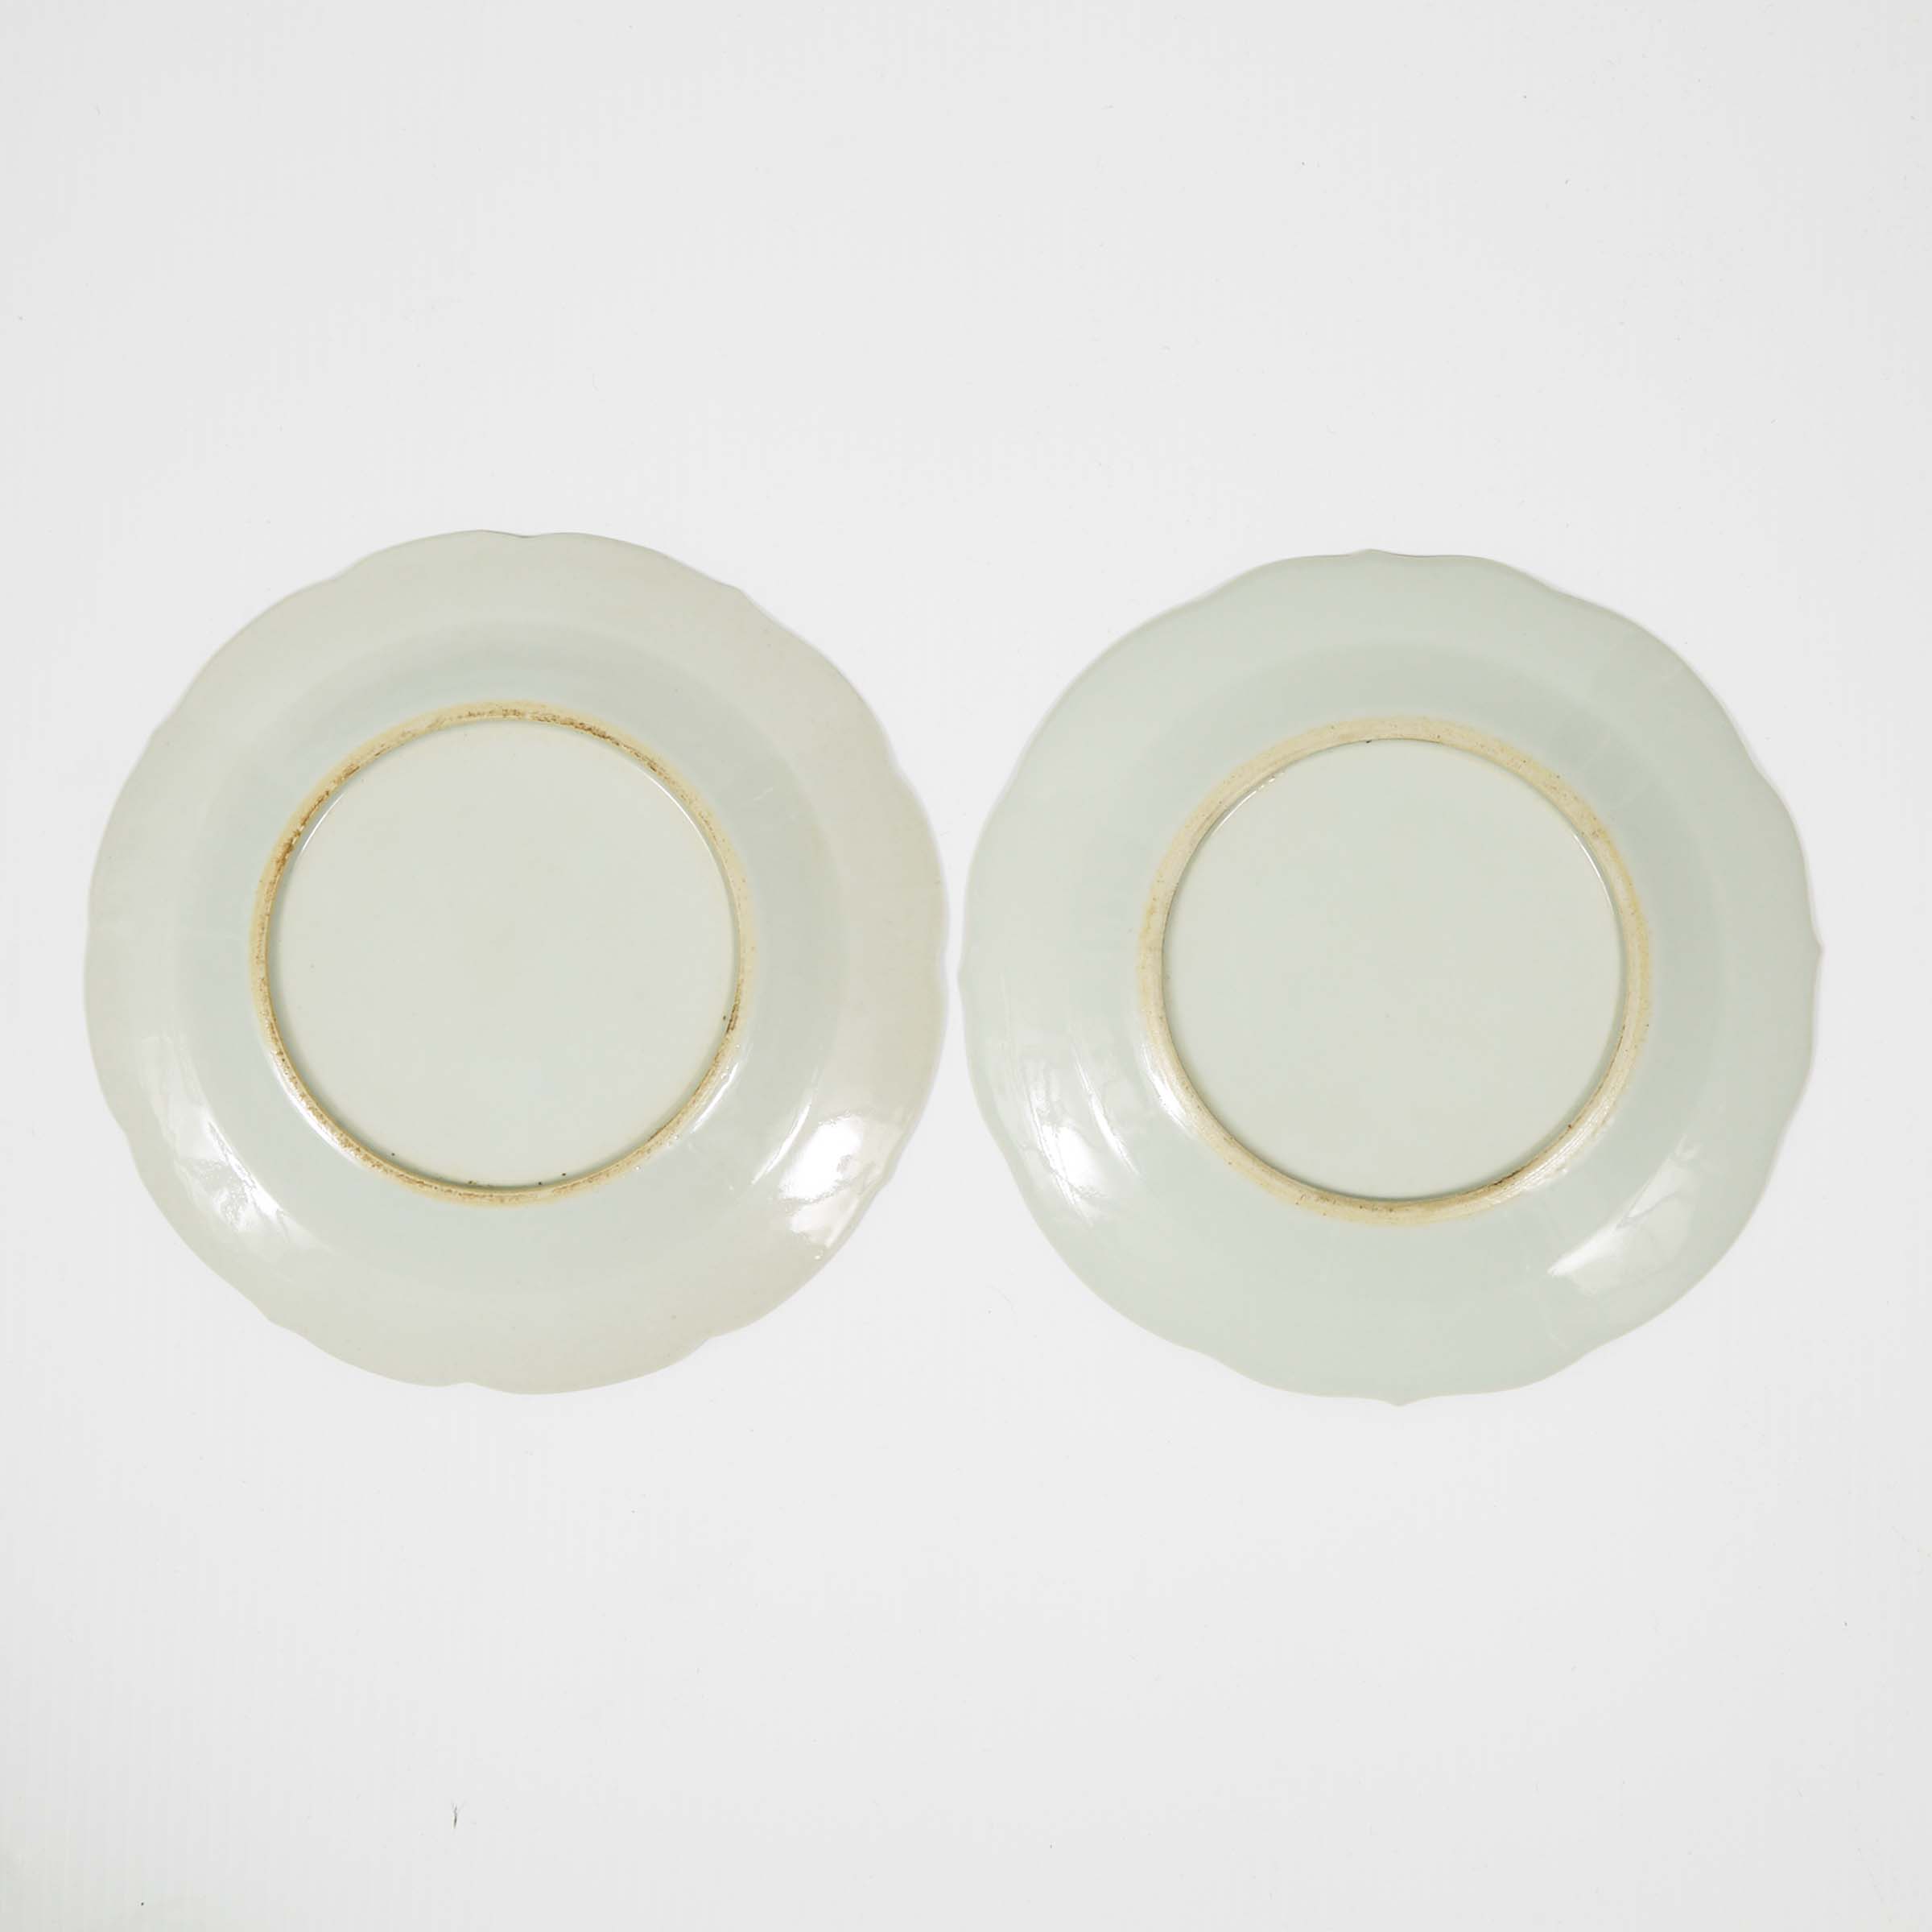 A Pair of Famille Rose Barbed-Rim Plates, 18th Century